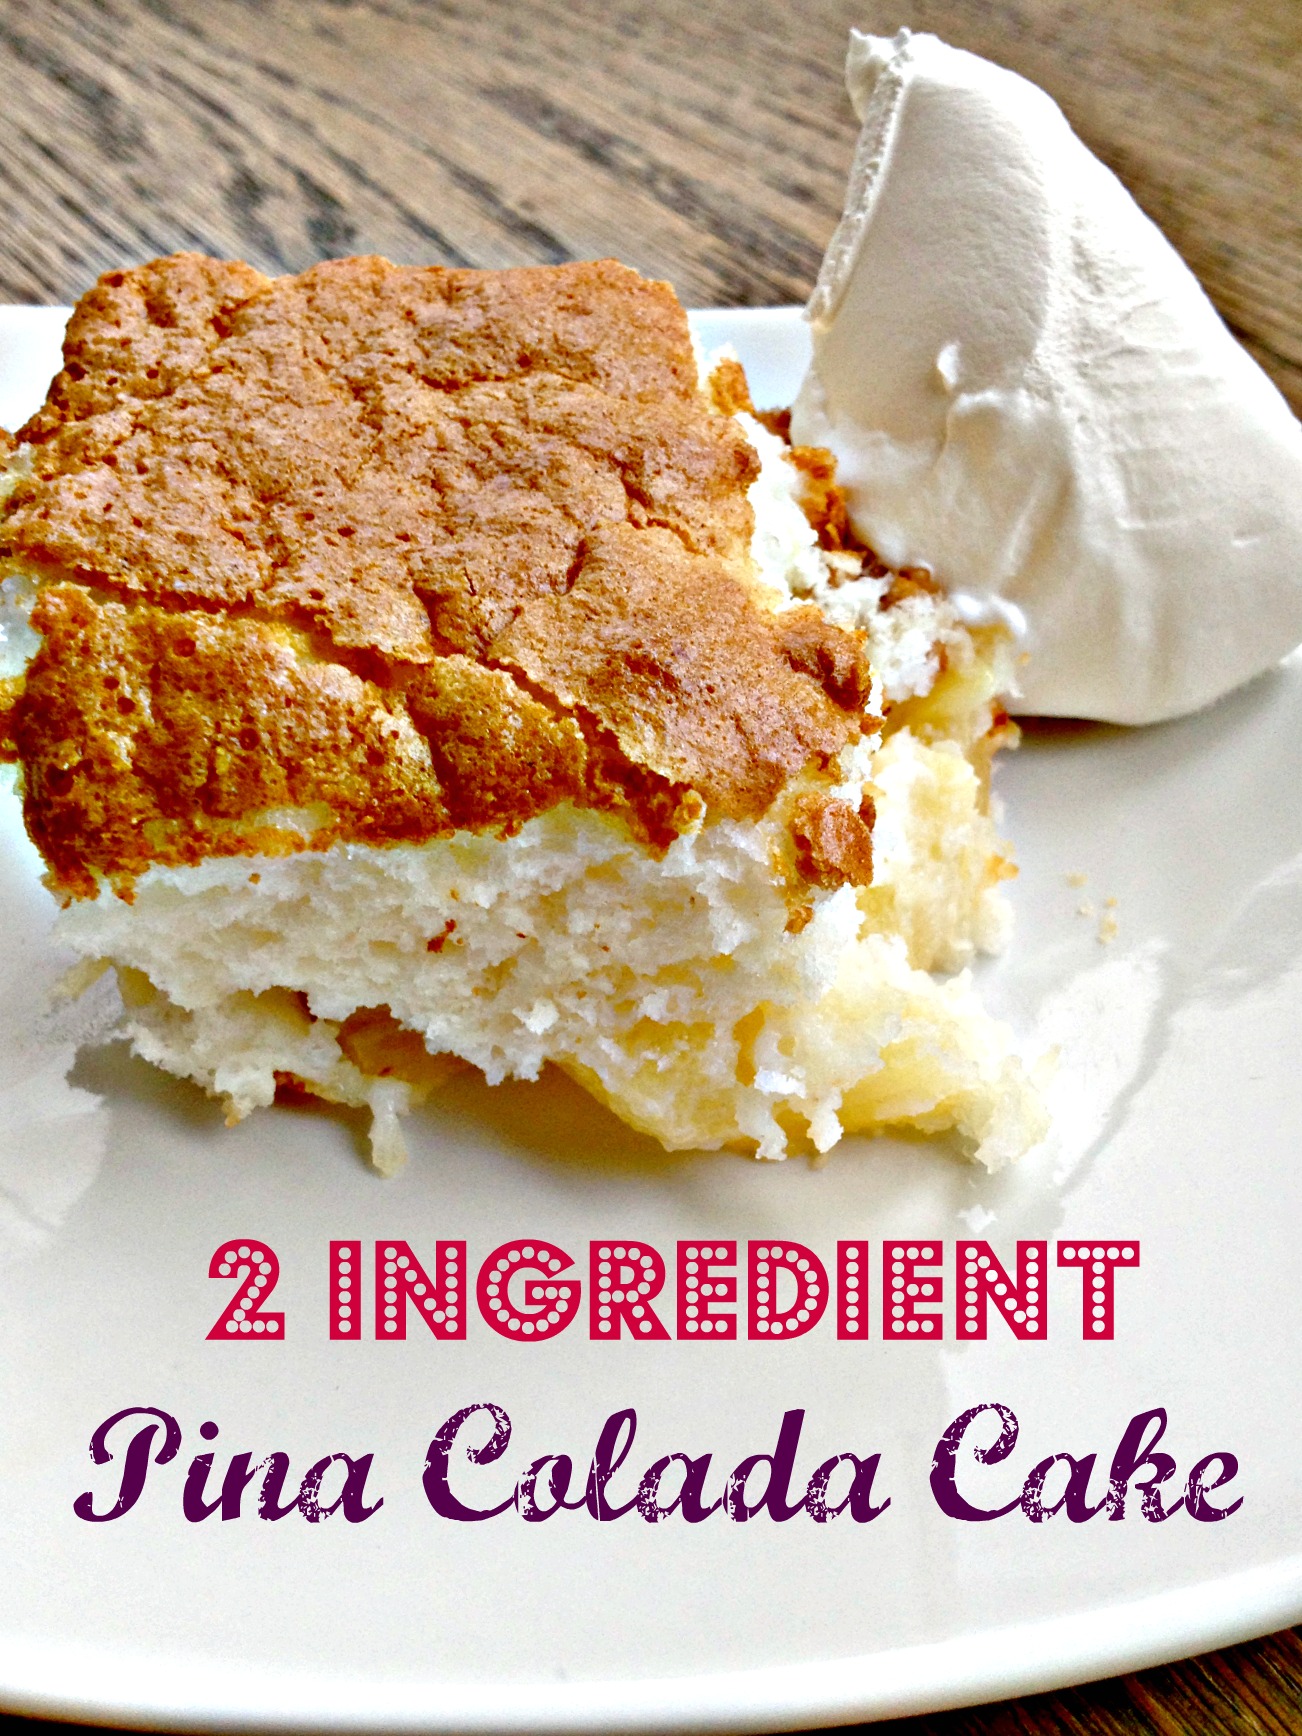 Fat free 2 Ingredient Pina Colada Cake!  Is this real life?!